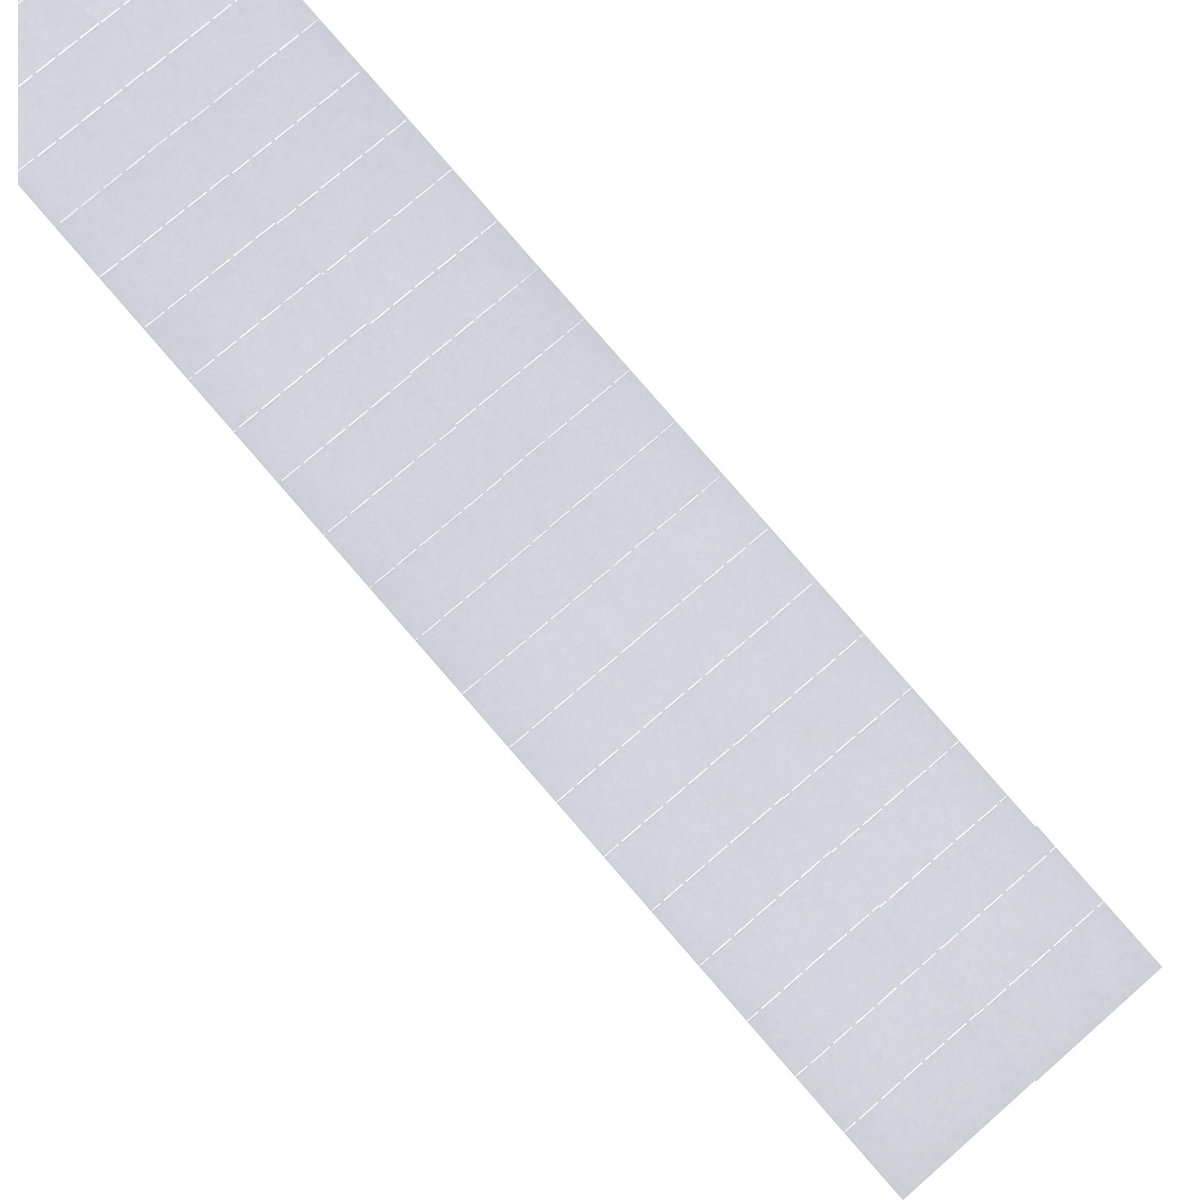 ferrocard labels – magnetoplan, HxW 15 x 80 mm, pack of 345, white-4